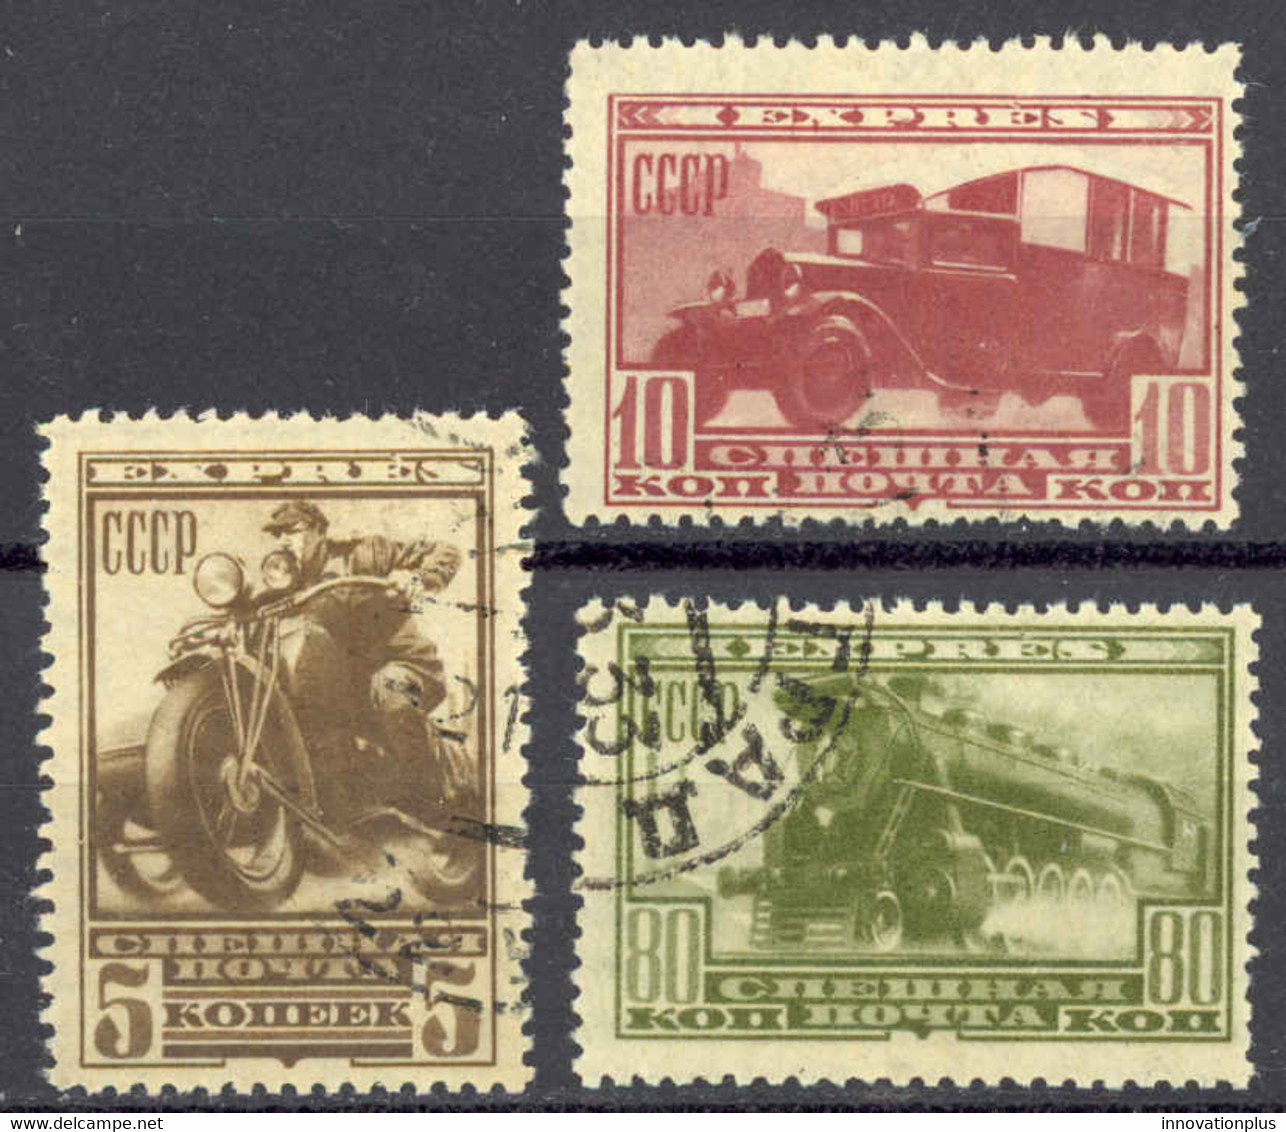 Russia Sc# E1-E3 Used 1932 Special Delivery - Express Mail